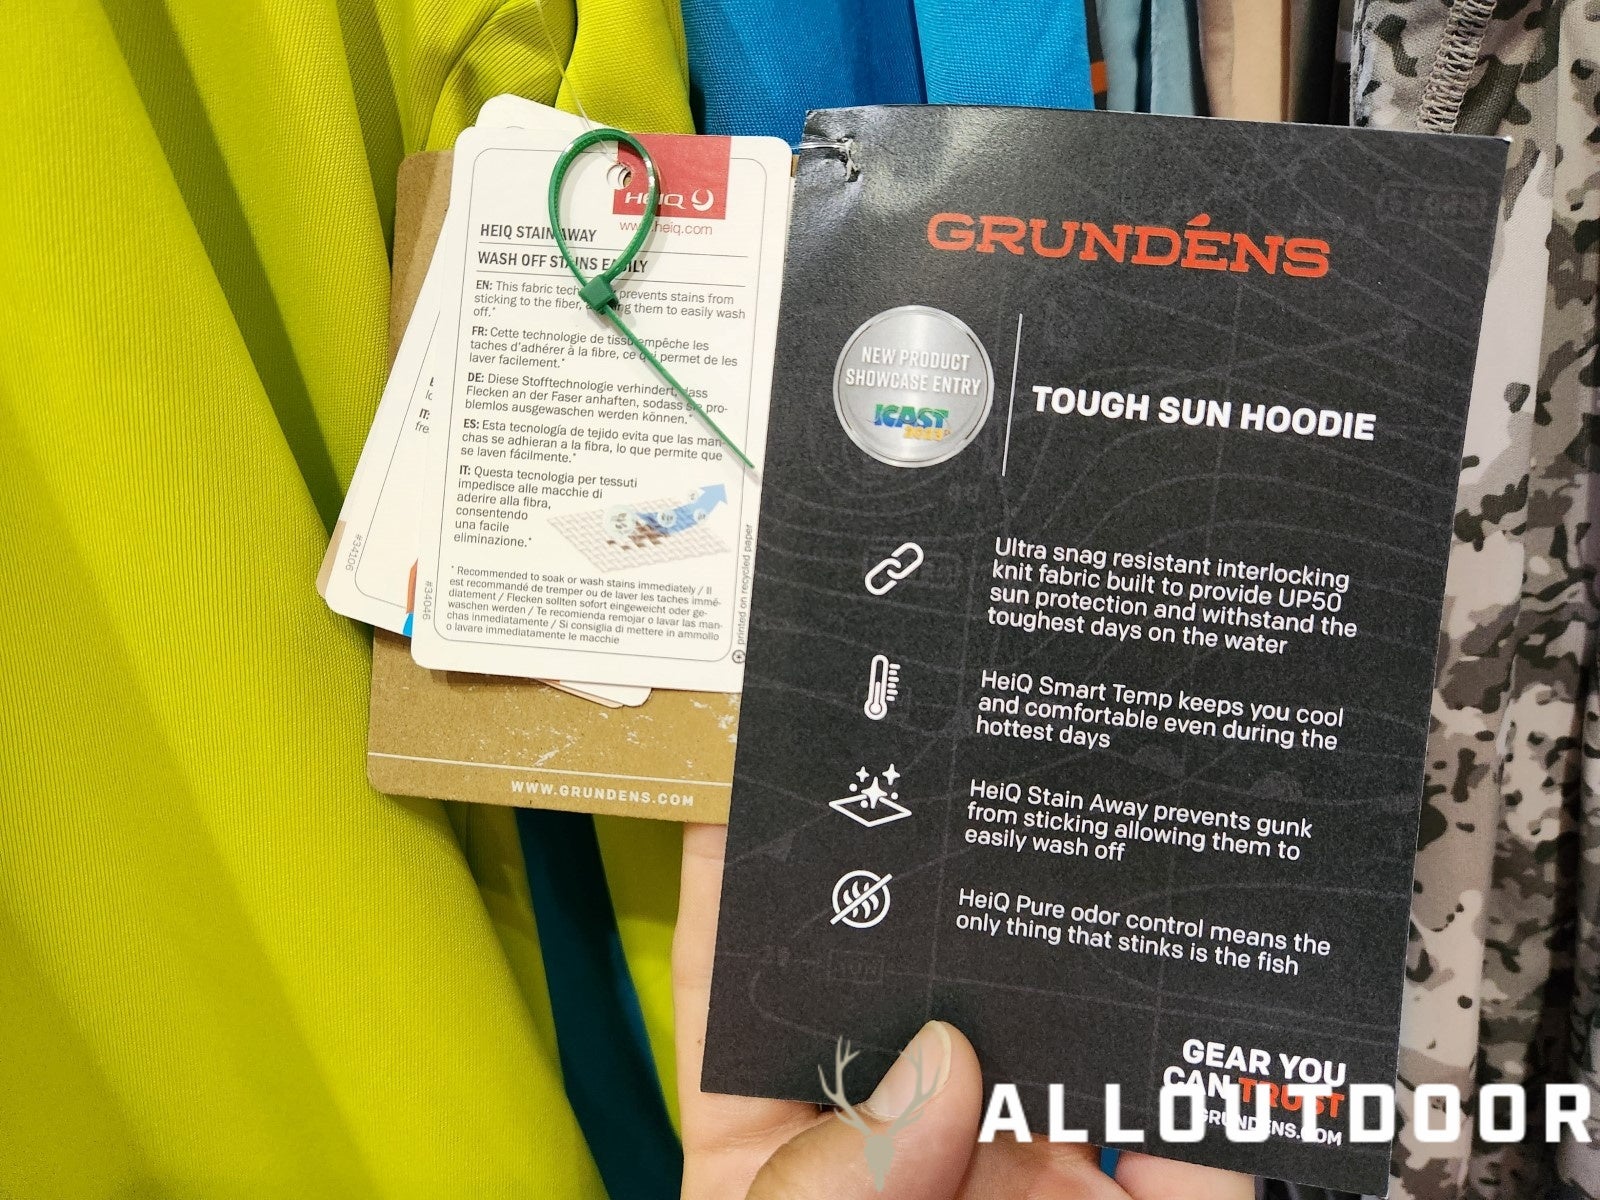 [ICAST 2023] The Tough Sun Hoodie from Grundens